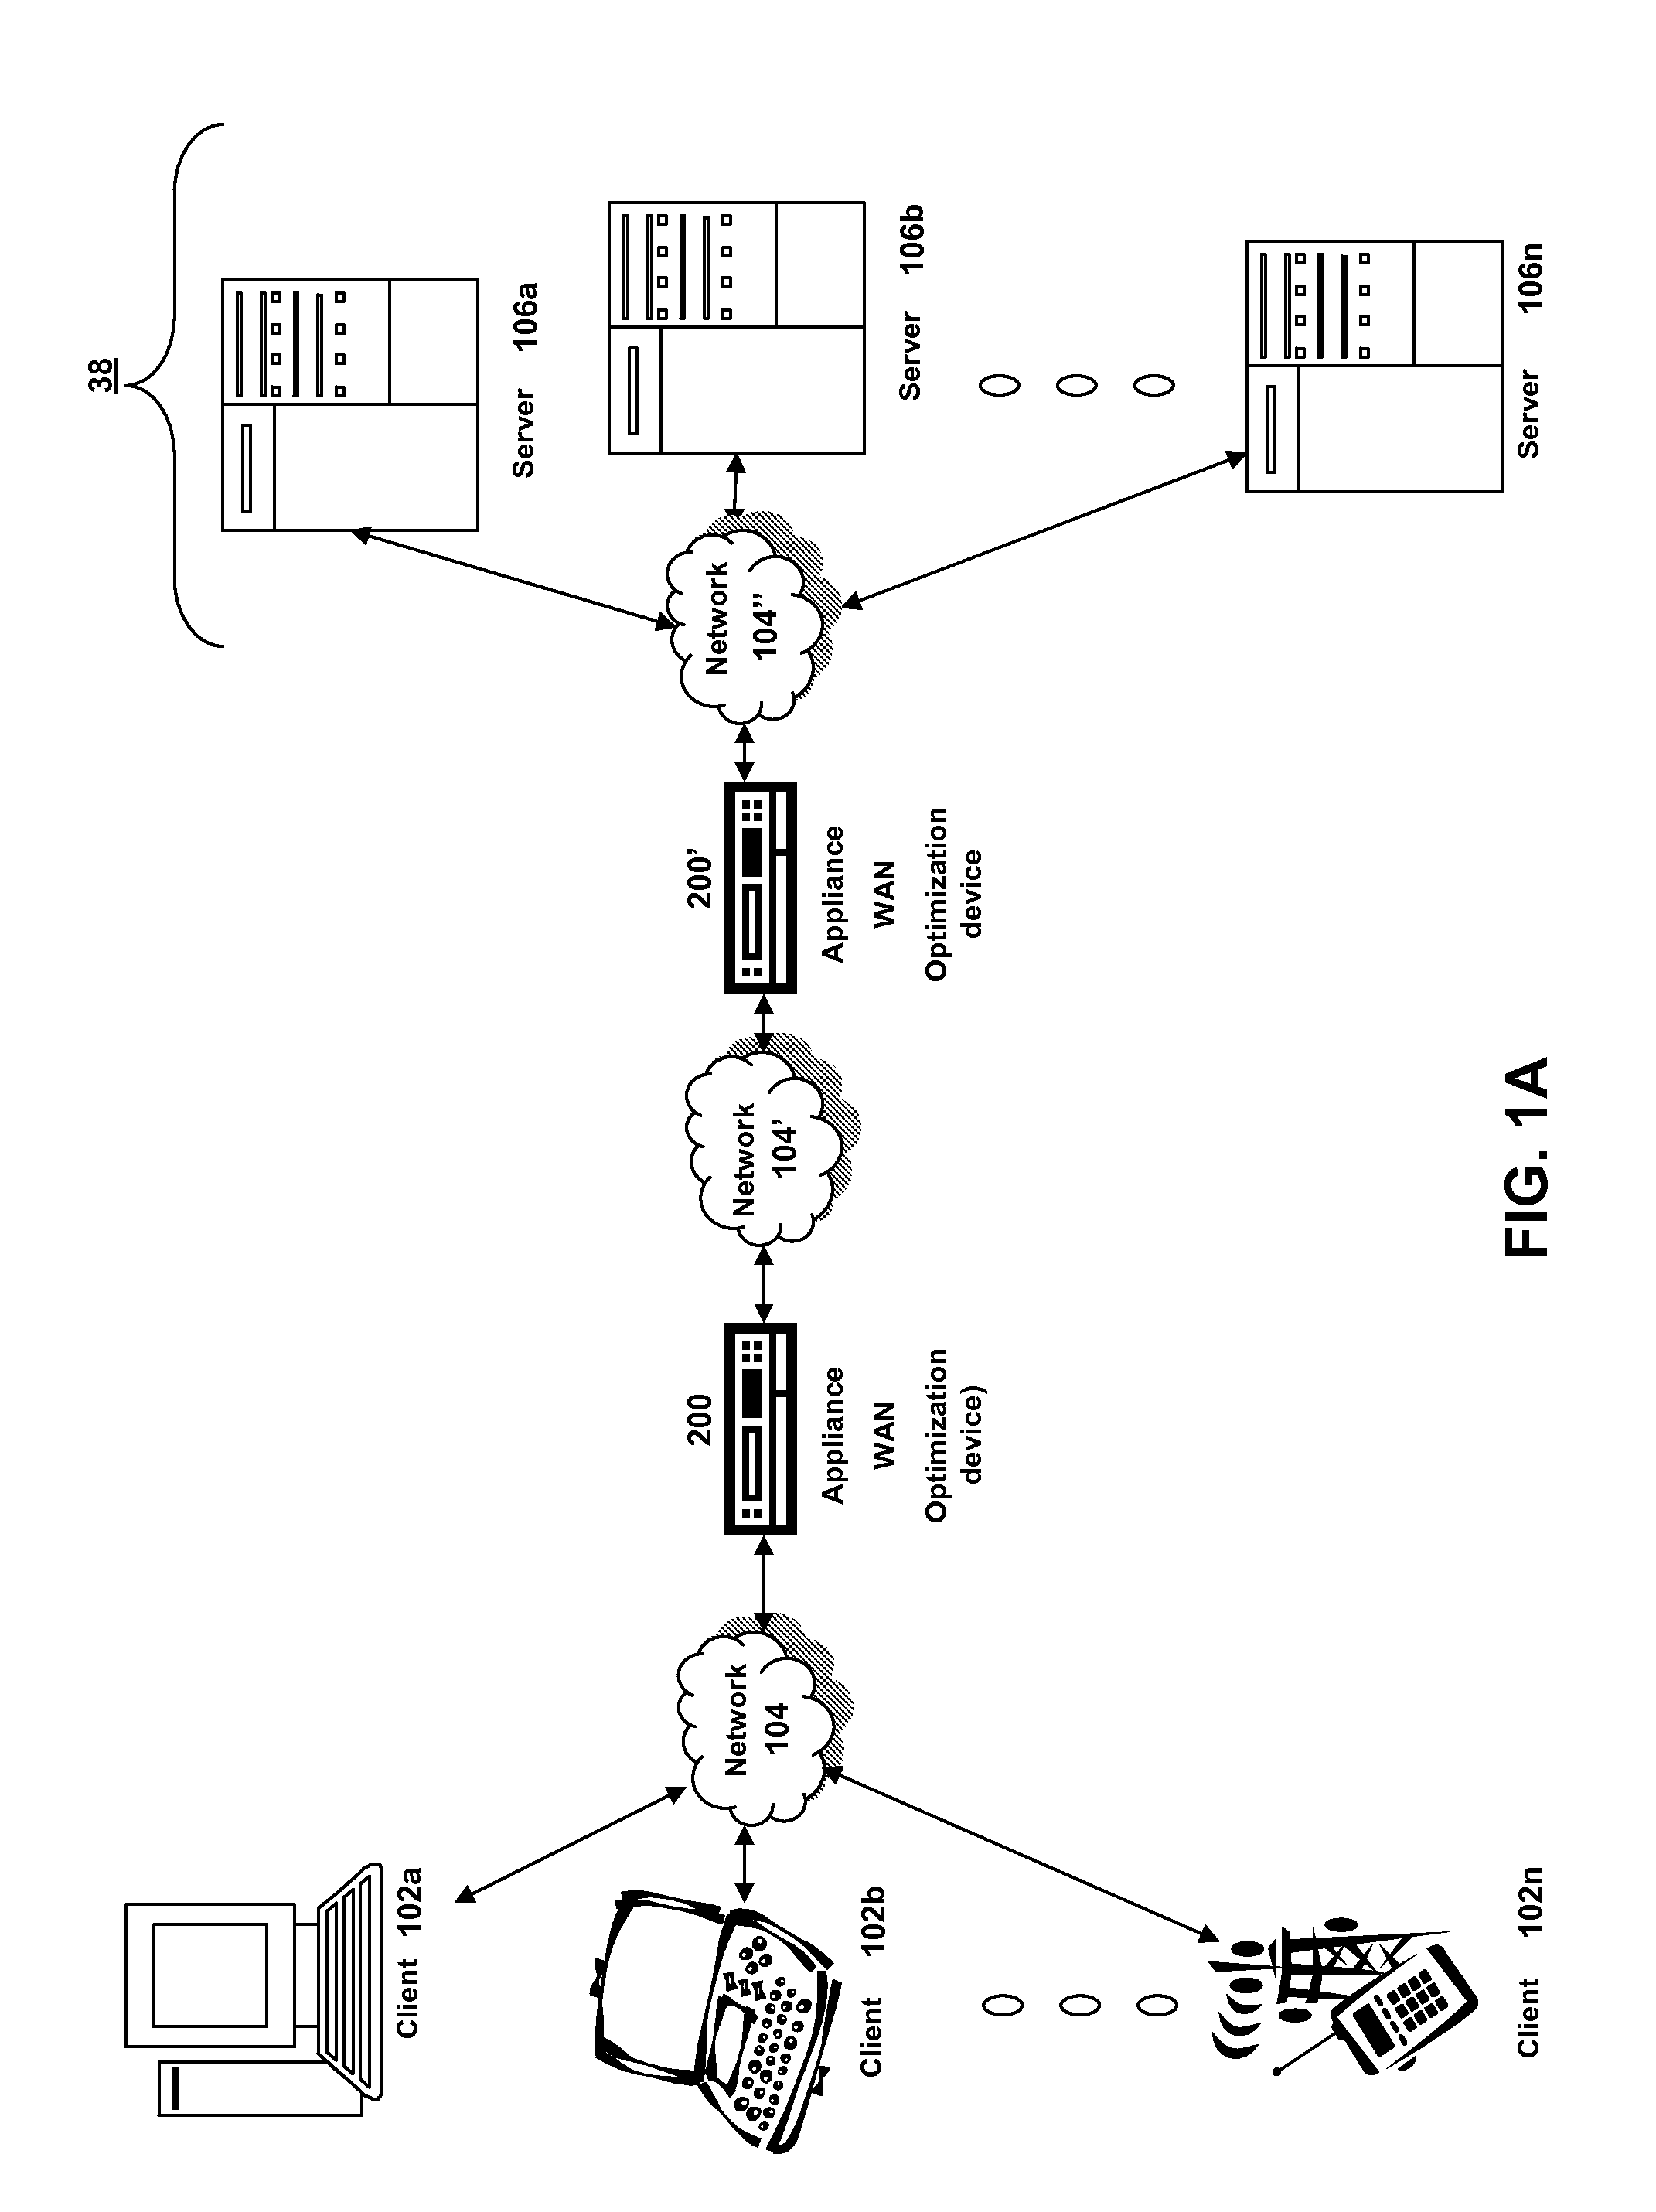 Systems and methods for multi-level quality of service classification in an intermediary device